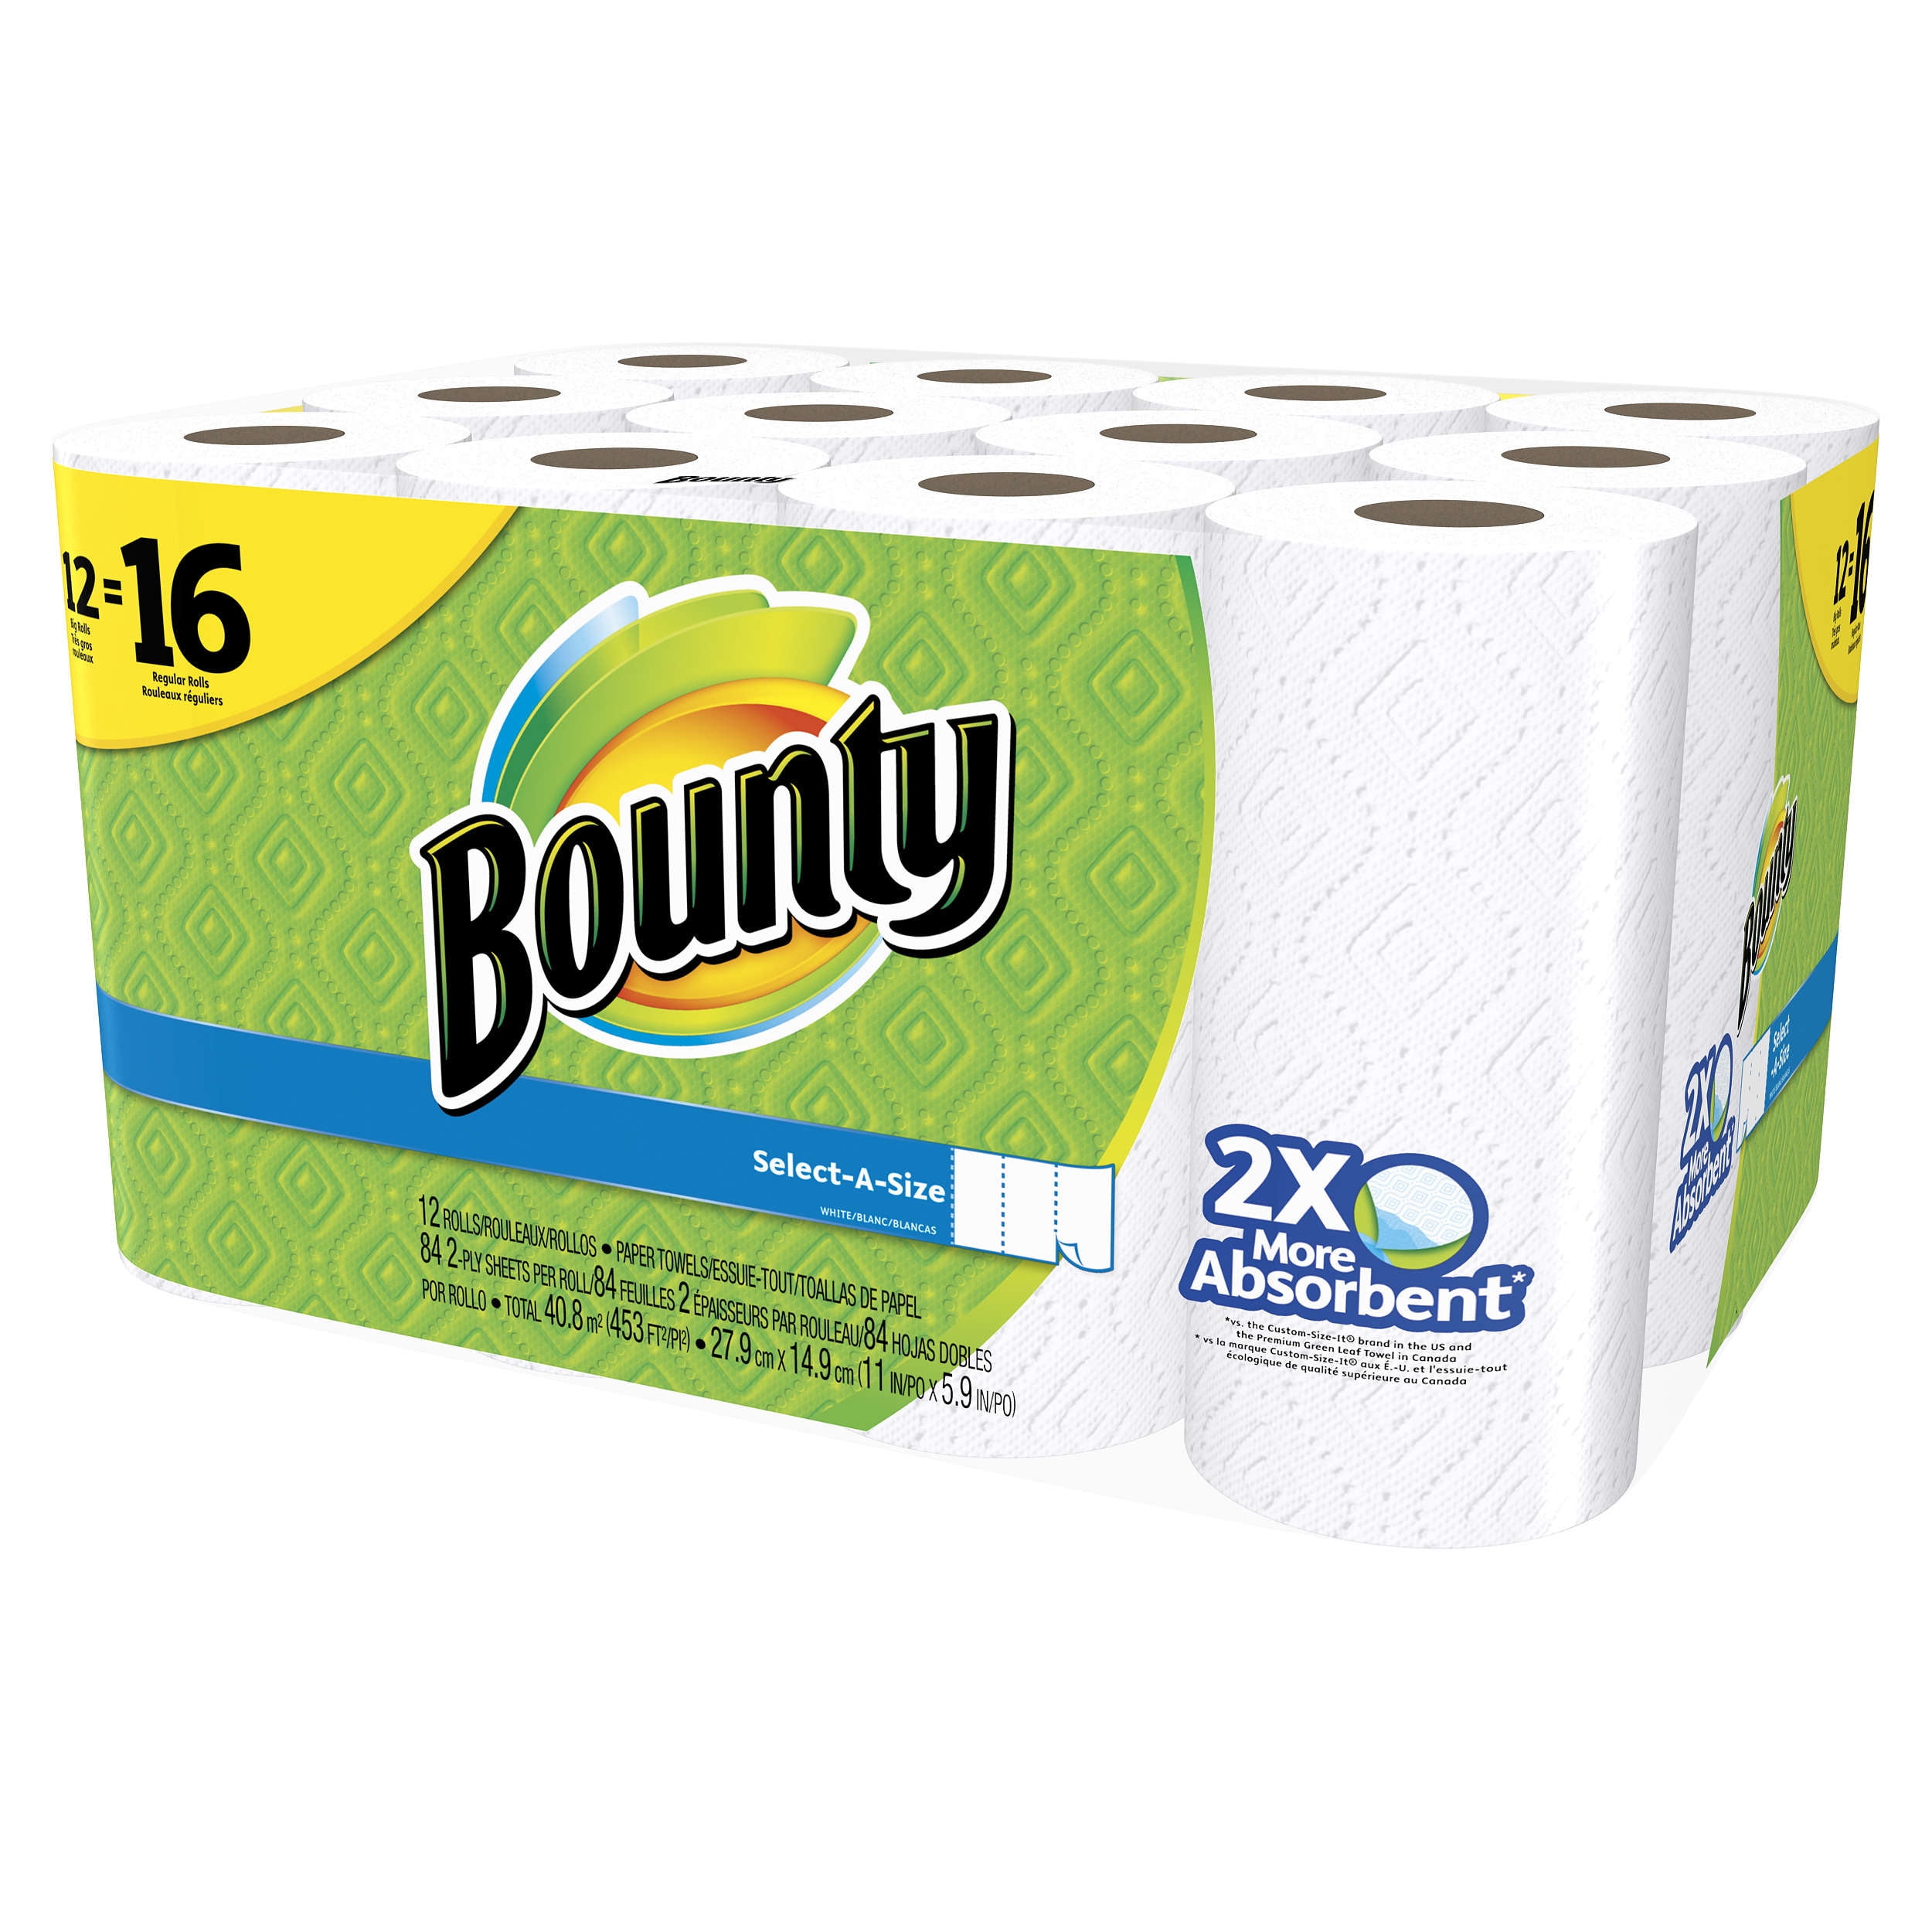 Bounty Paper Towel Roll Perforated Patterned Printed 2-Ply 6 Double Plus Rolls 